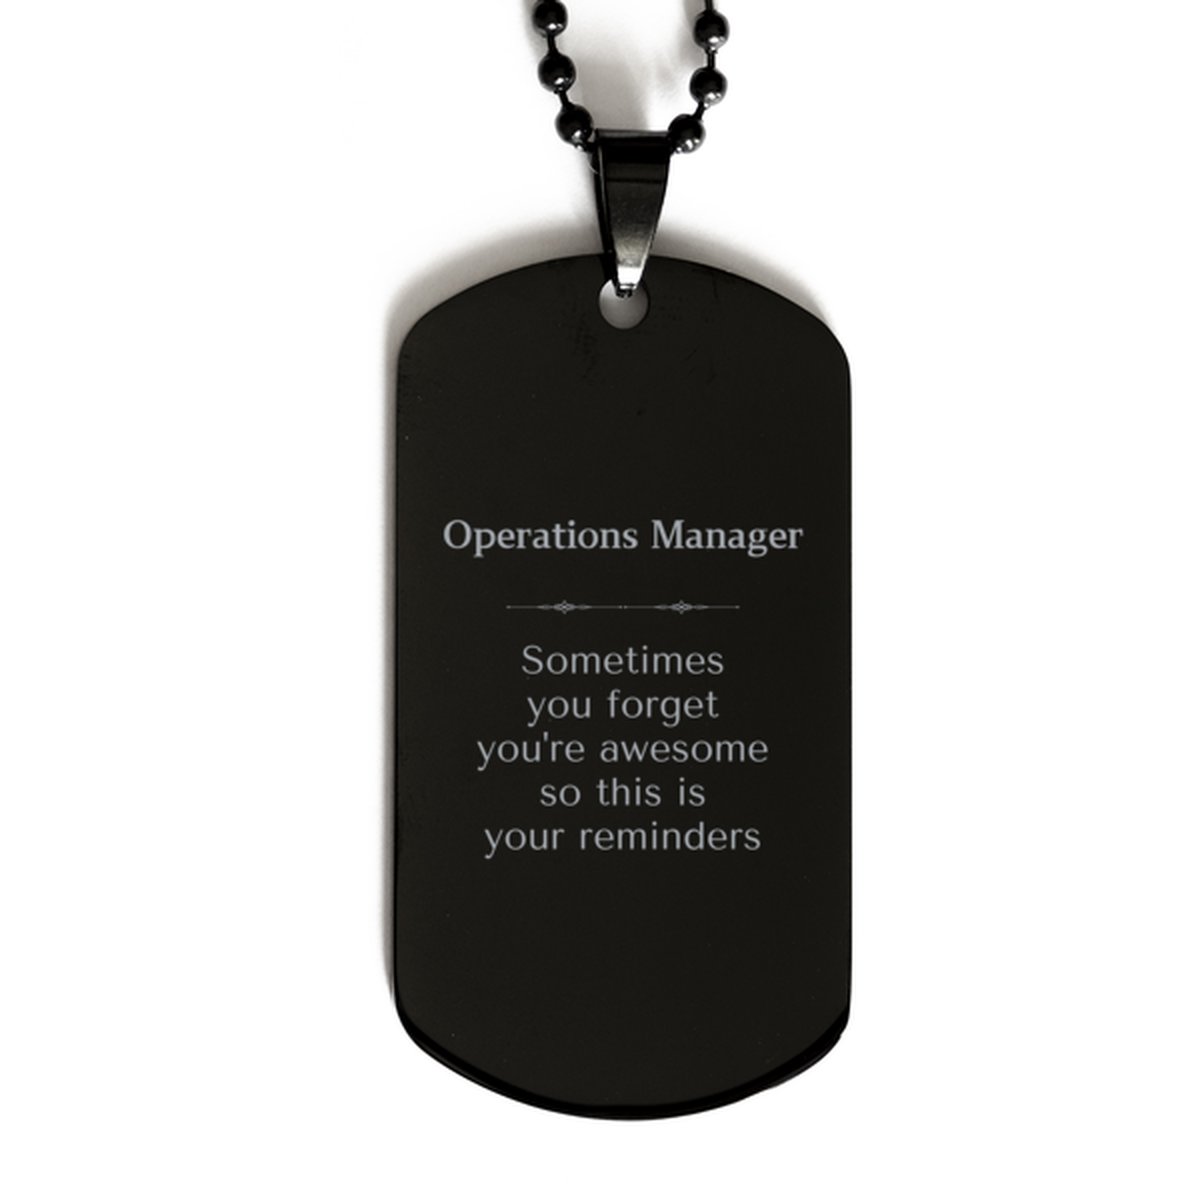 Sentimental Operations Manager Black Dog Tag, Operations Manager Sometimes you forget you're awesome so this is your reminders, Graduation Christmas Birthday Gifts for Operations Manager, Men, Women, Coworkers